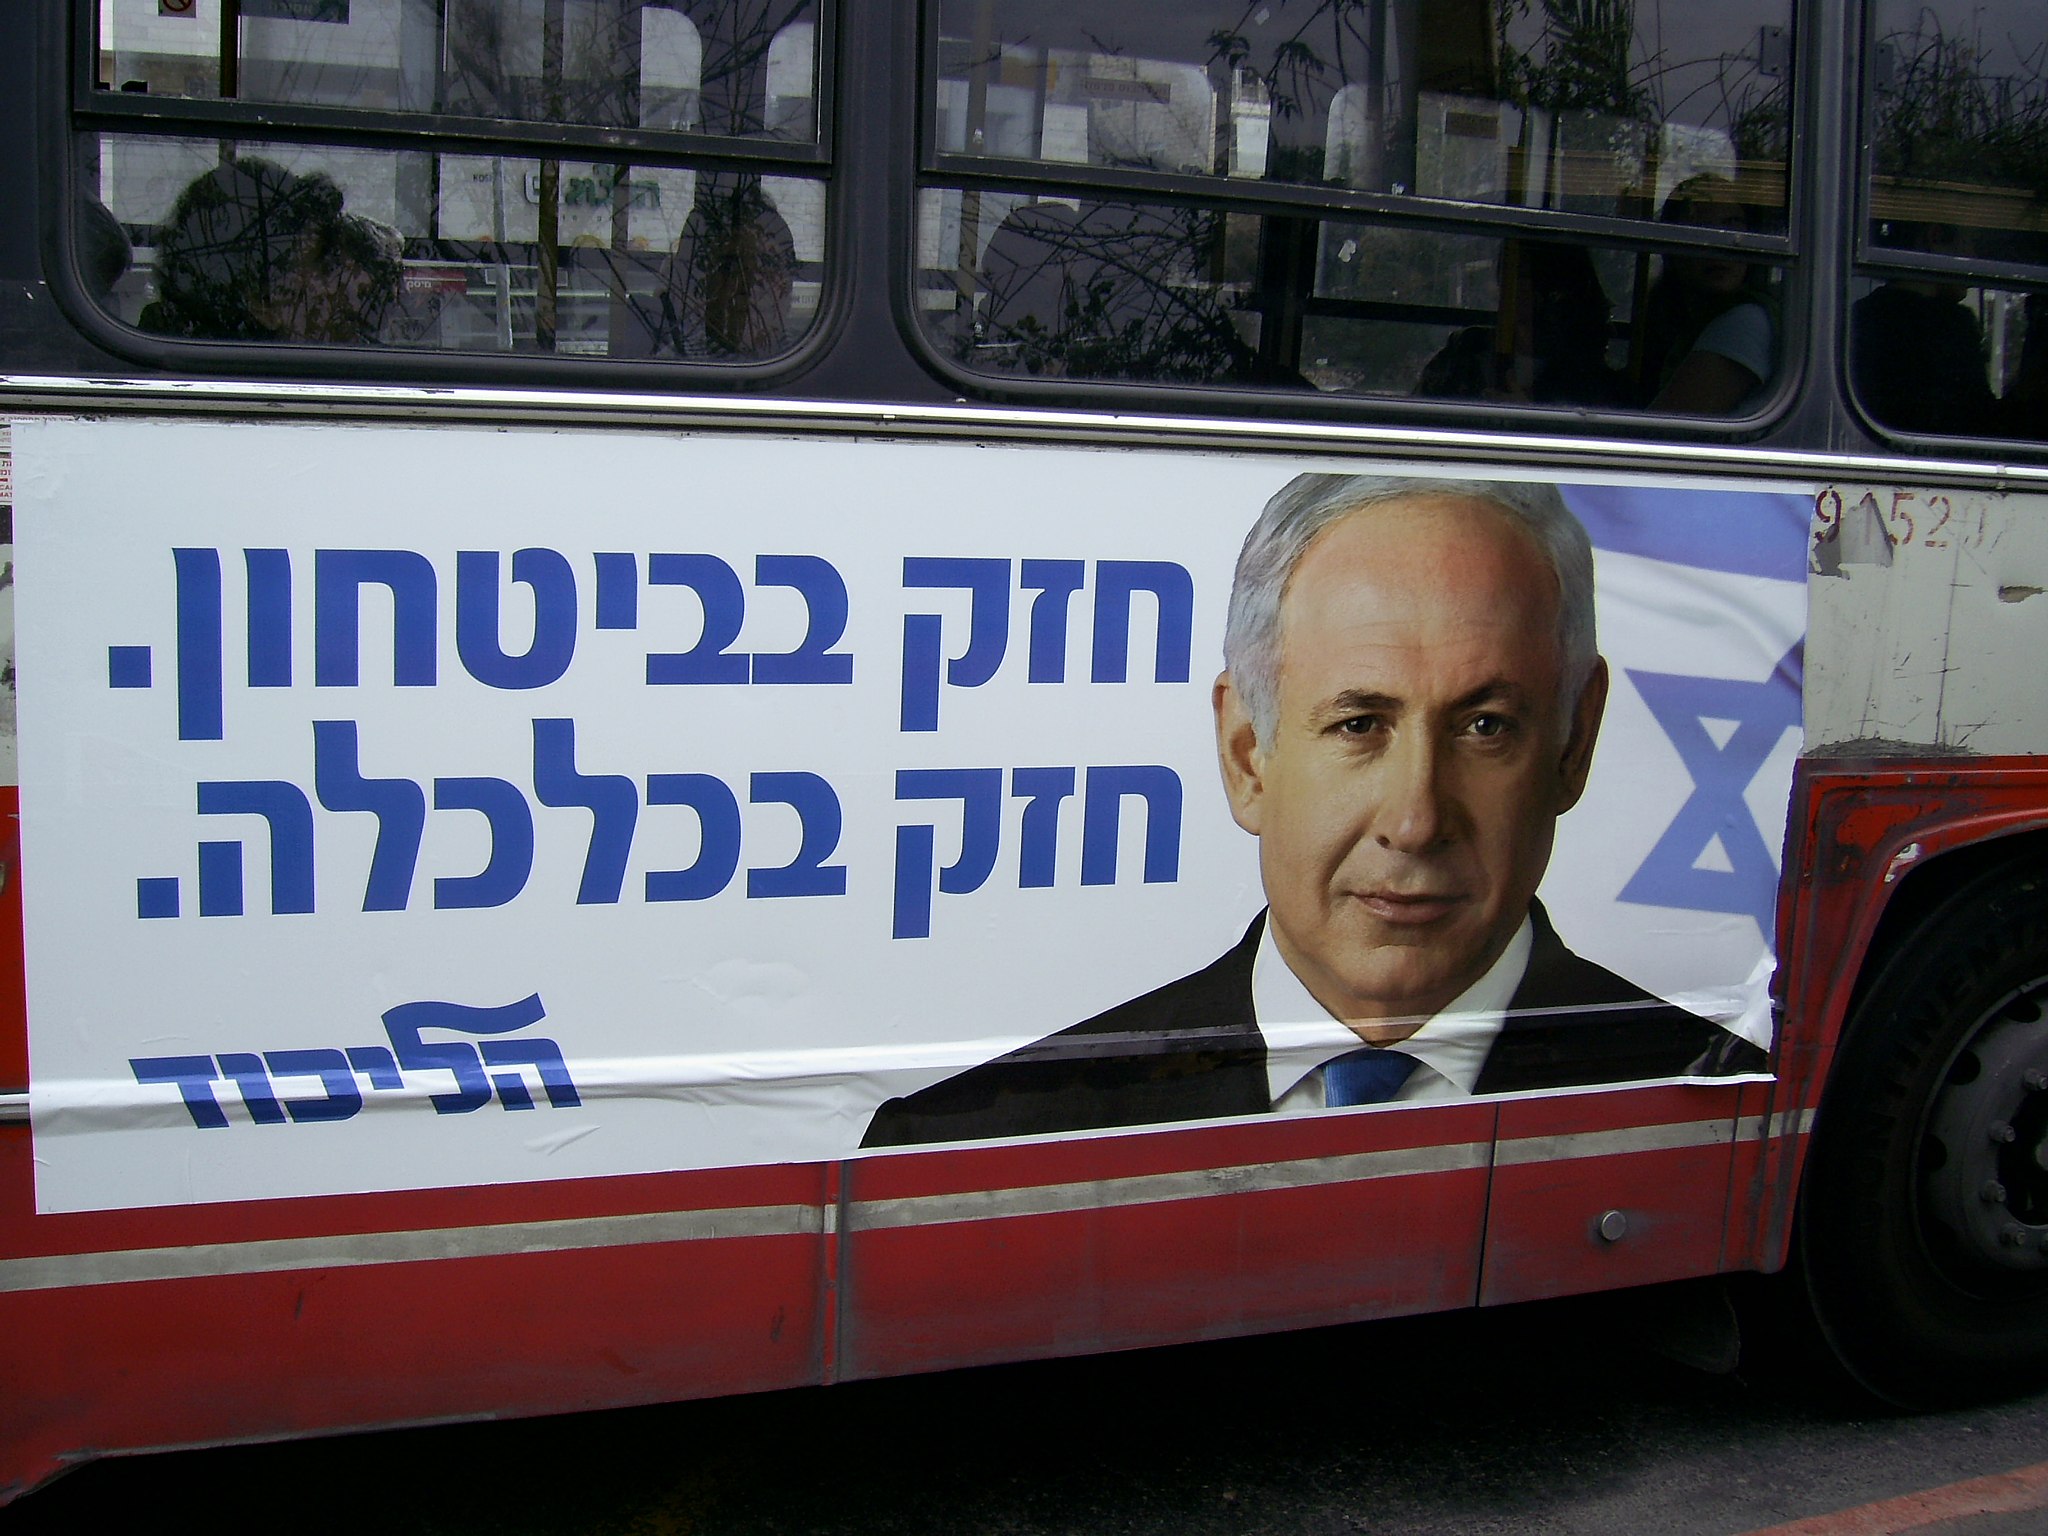 Likud 2009 campaign poster calling Netanyahu the strongest on security and the economy. (Wikimedia Commons)